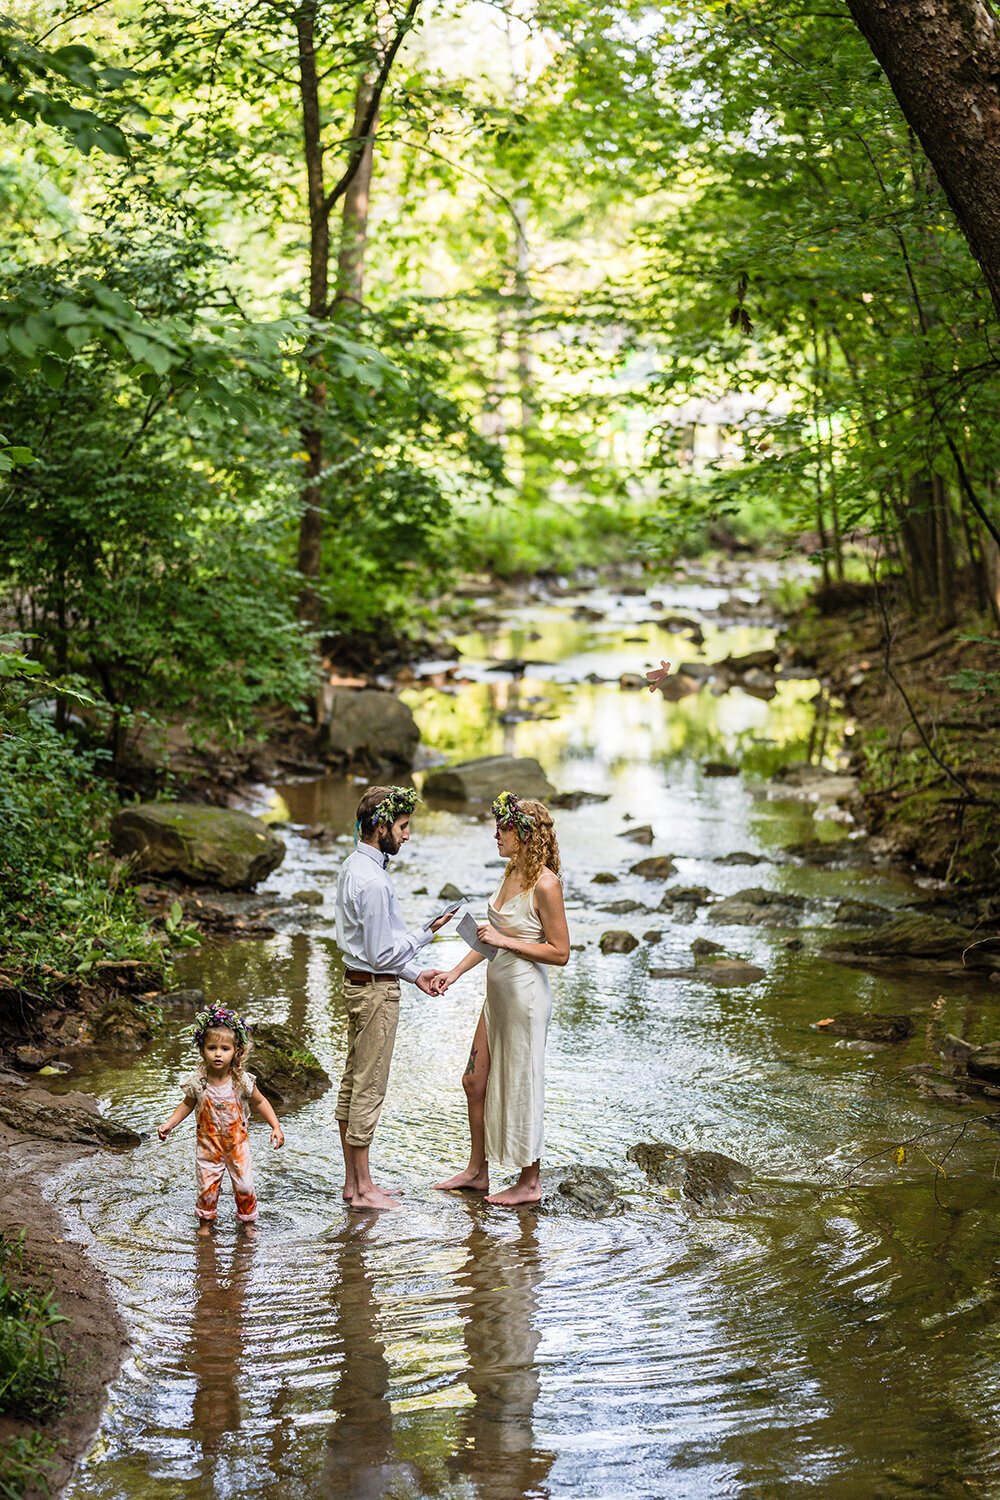 A couple on their elopement day face one another and read their vows while standing in the creek at Fishburn Park. Their child can be seen behind the groom looking out in one direction as she steps in the water.